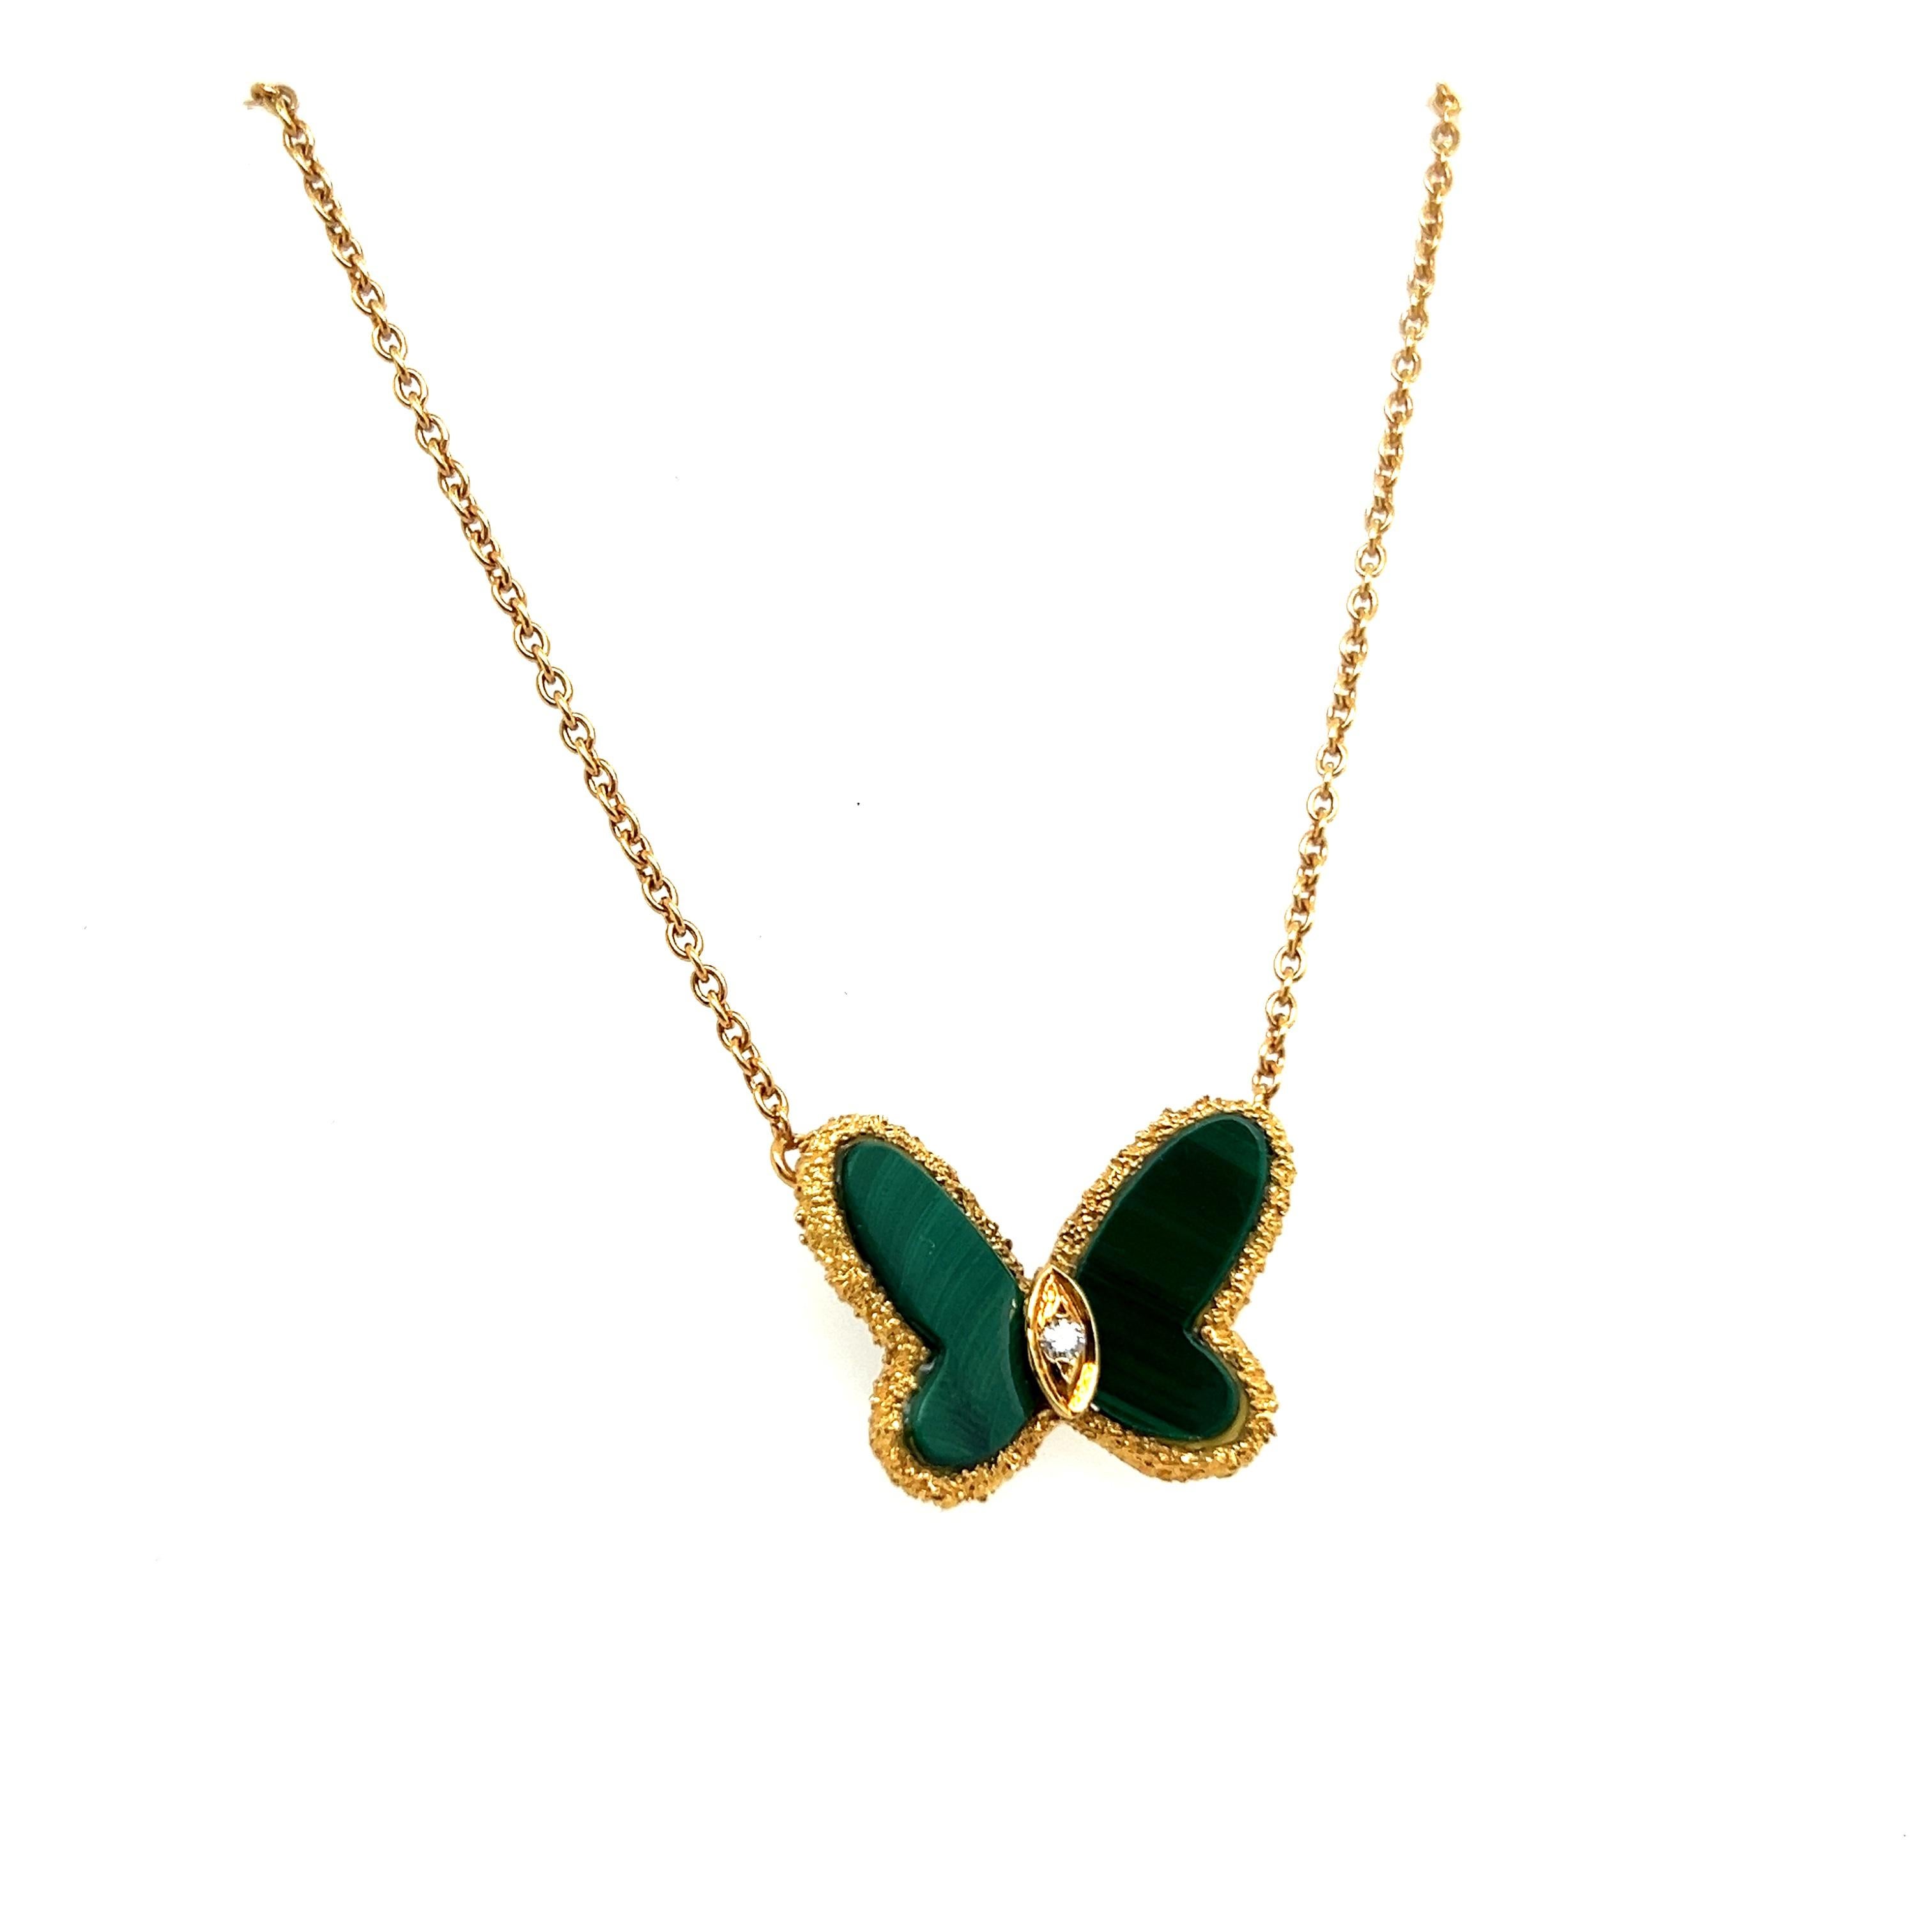 Introducing an authentic Van Cleef & Arpels Vintage Alhambra Butterfly Necklace with Malachite and Diamond. 

This exquisite piece highlights a stunning vintage collar-length design, featuring an 18-karat yellow gold chain adorned with a charming